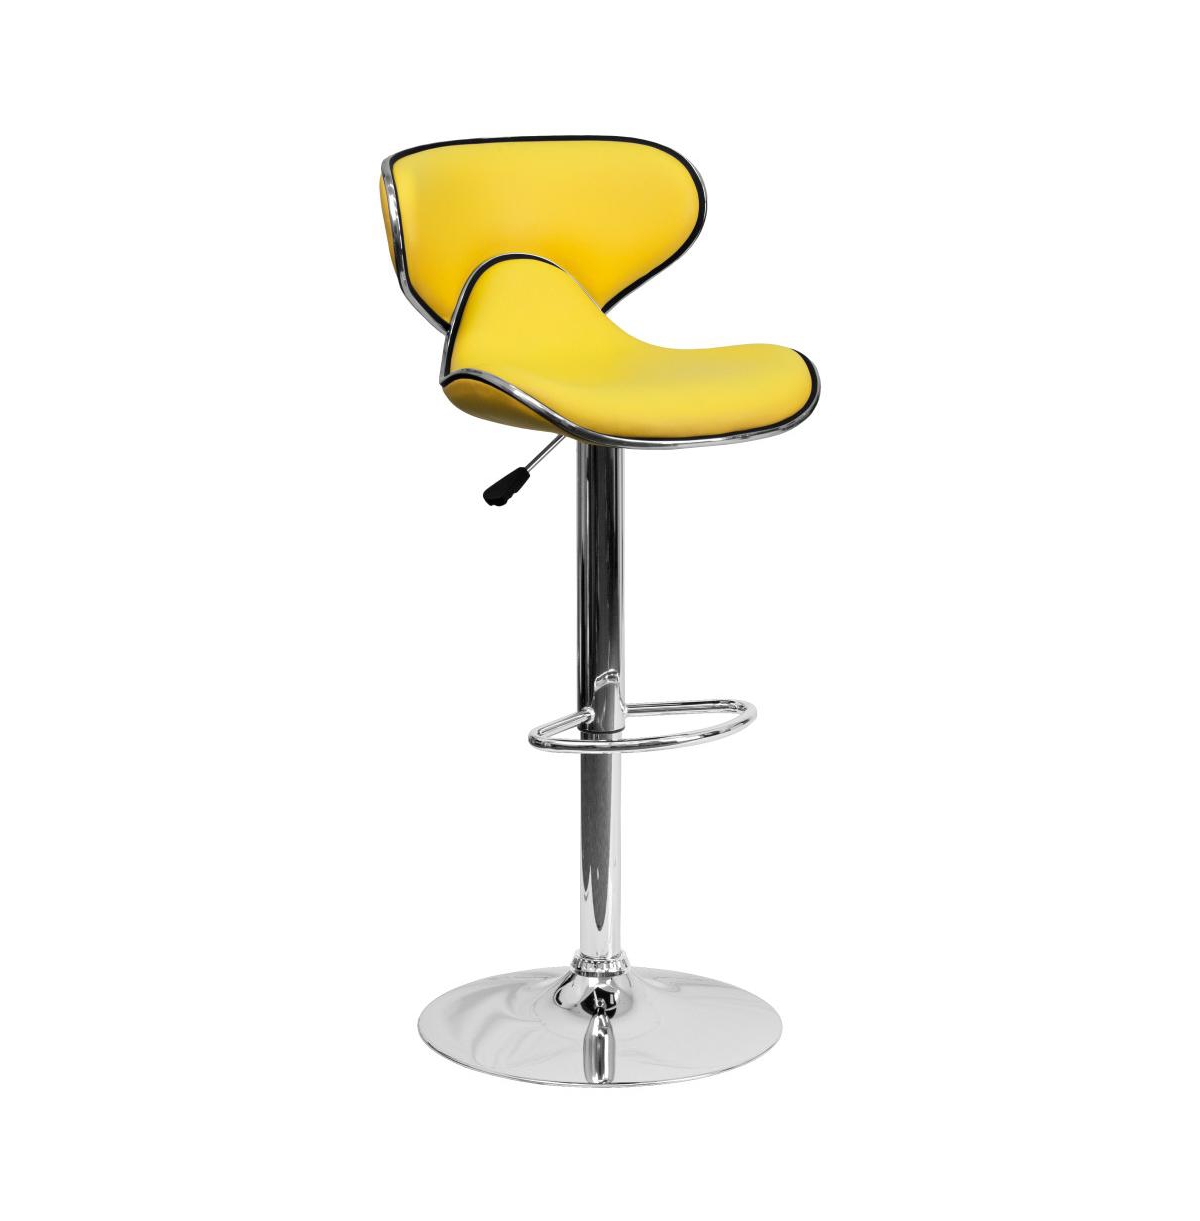 Emma+oliver Contemporary Cozy Mid-back Vinyl Adjustable Height Barstool In Yellow